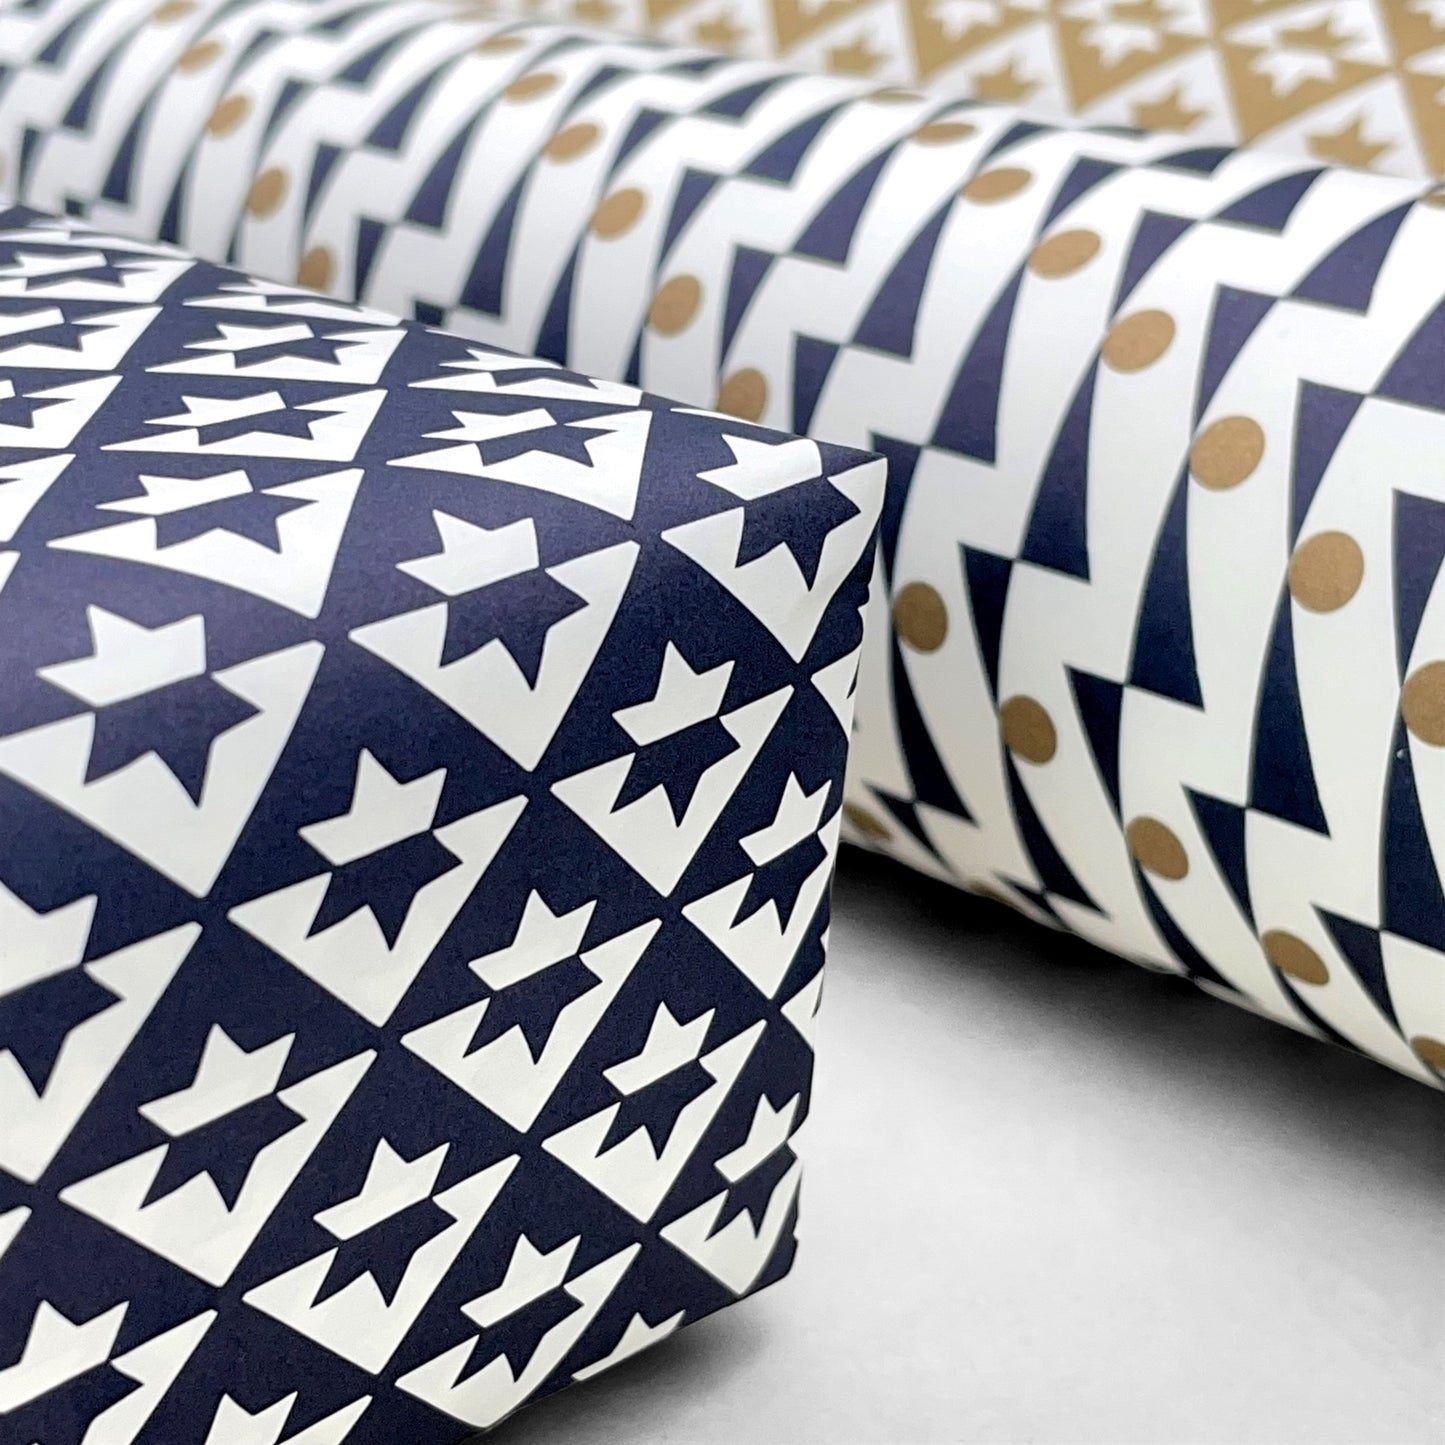 wrapping paper with an abstract star pattern in dark navy and white by Ola Studio